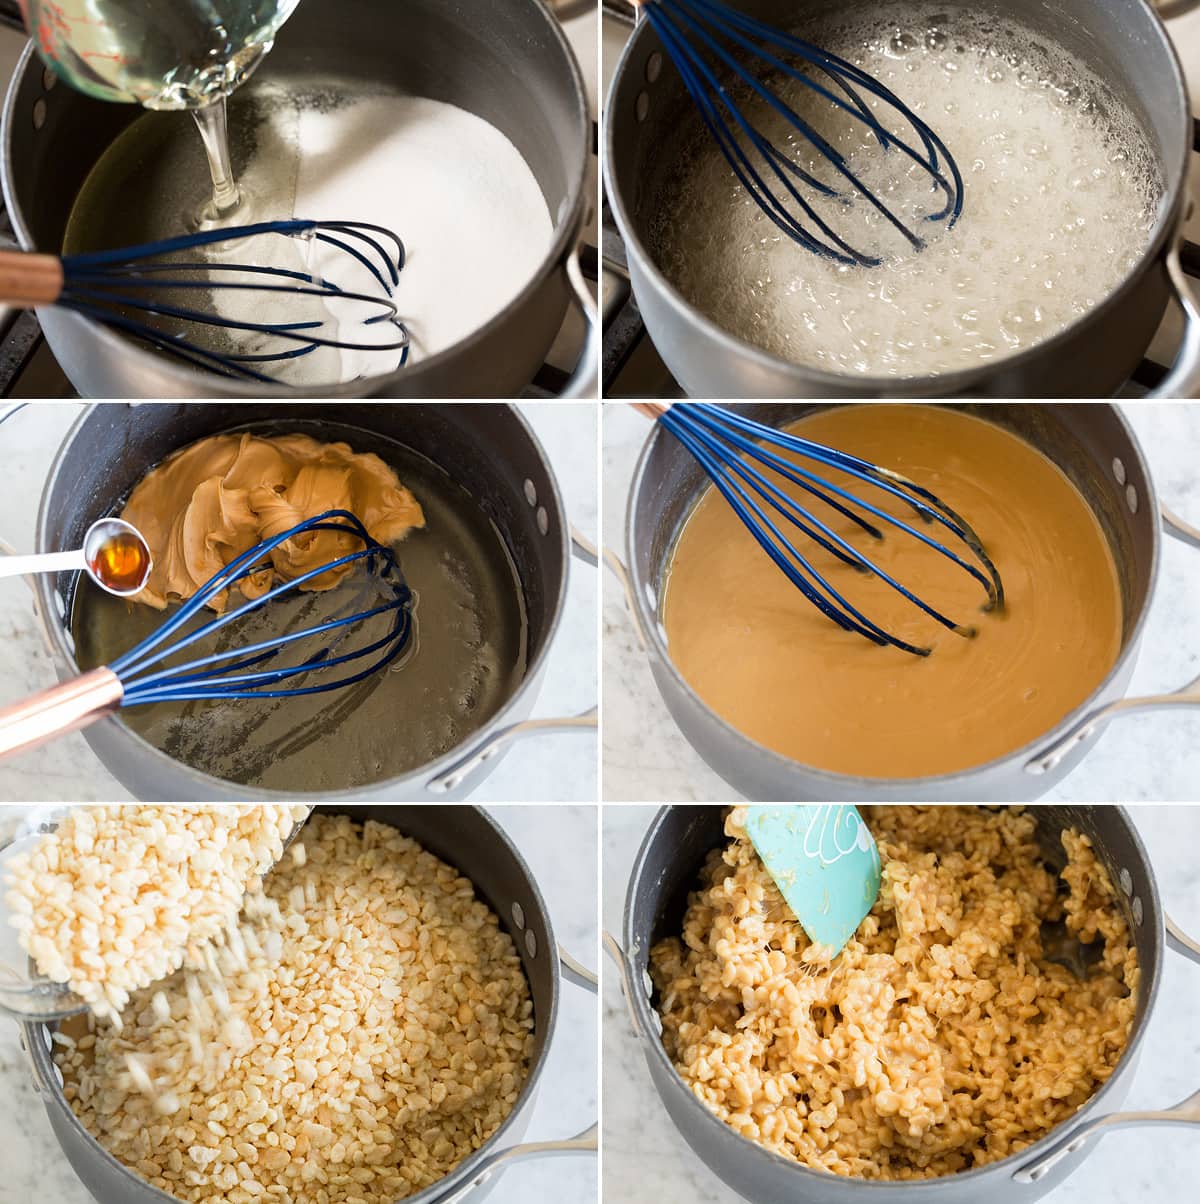 Collage of six images showing steps of making scotcheroos sweet peanut butter coating and tossing with rice krispies.